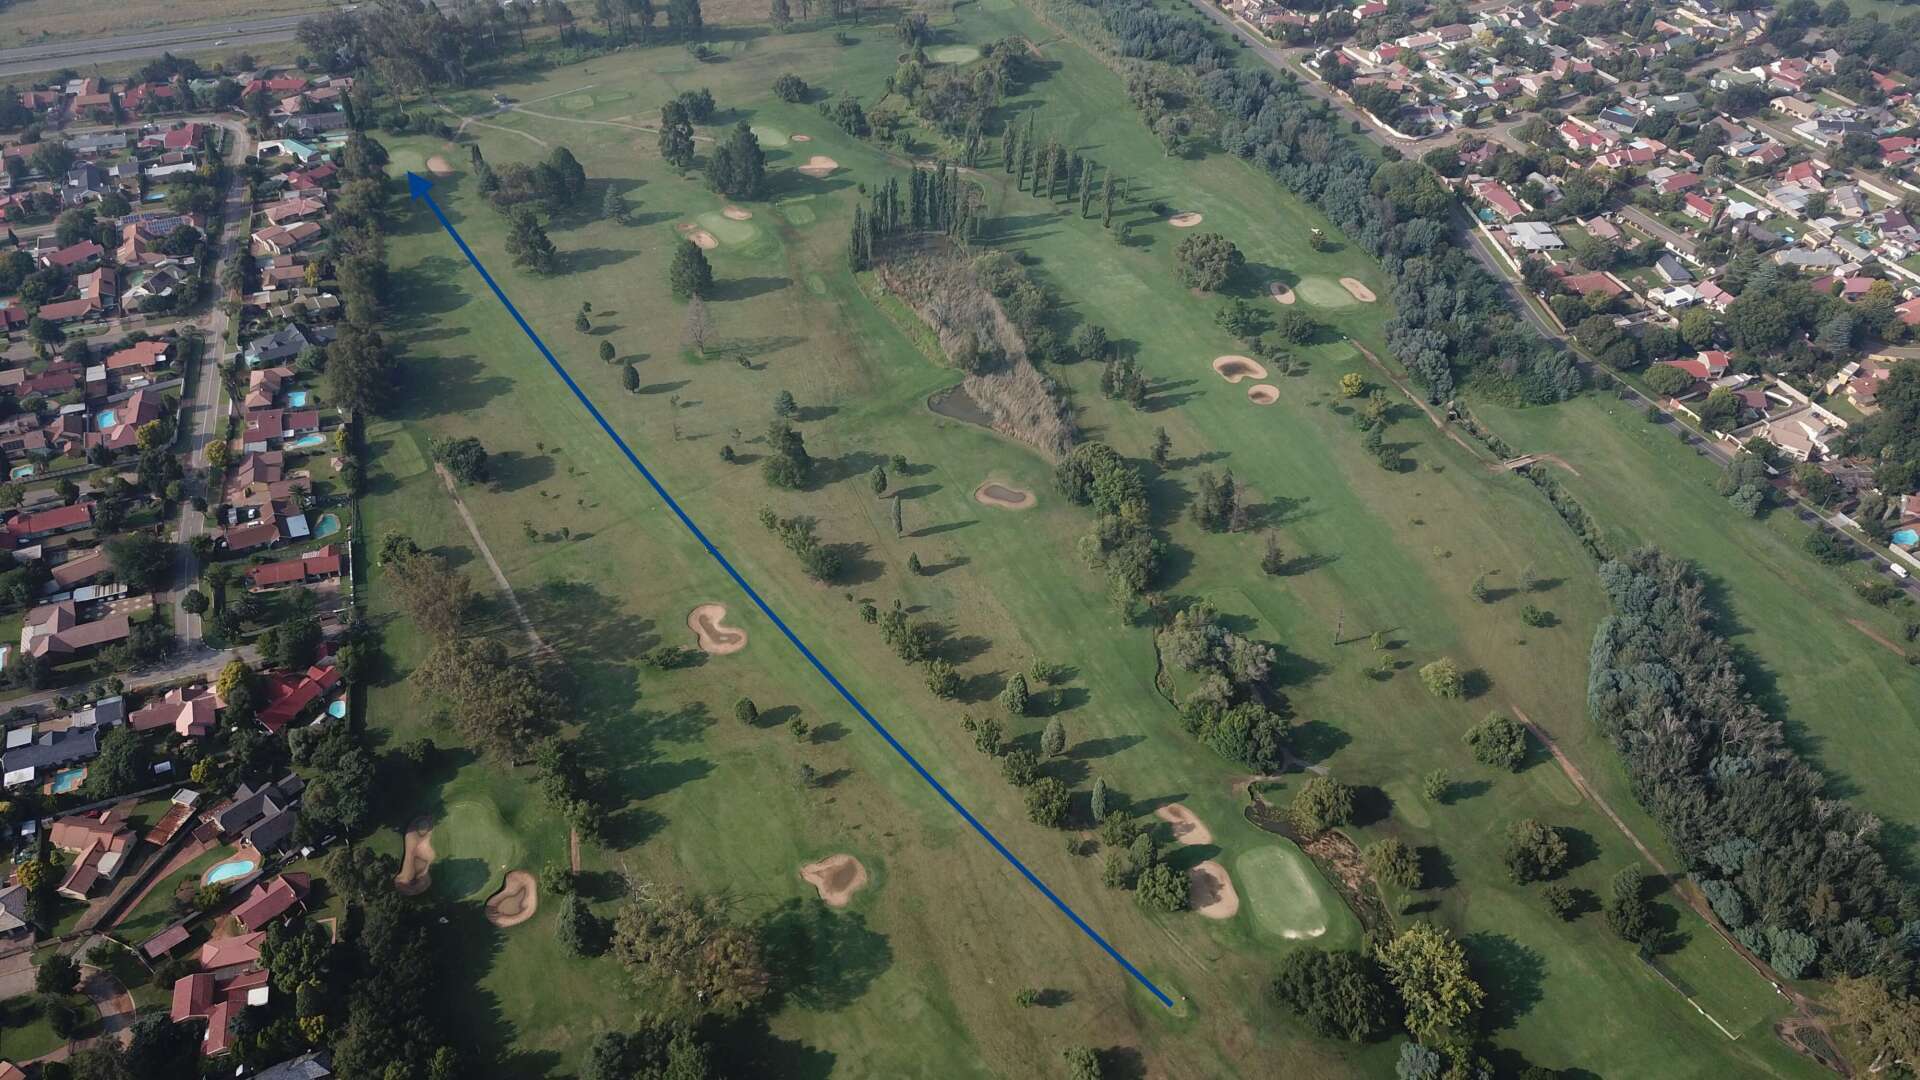 Hole 4 of the course